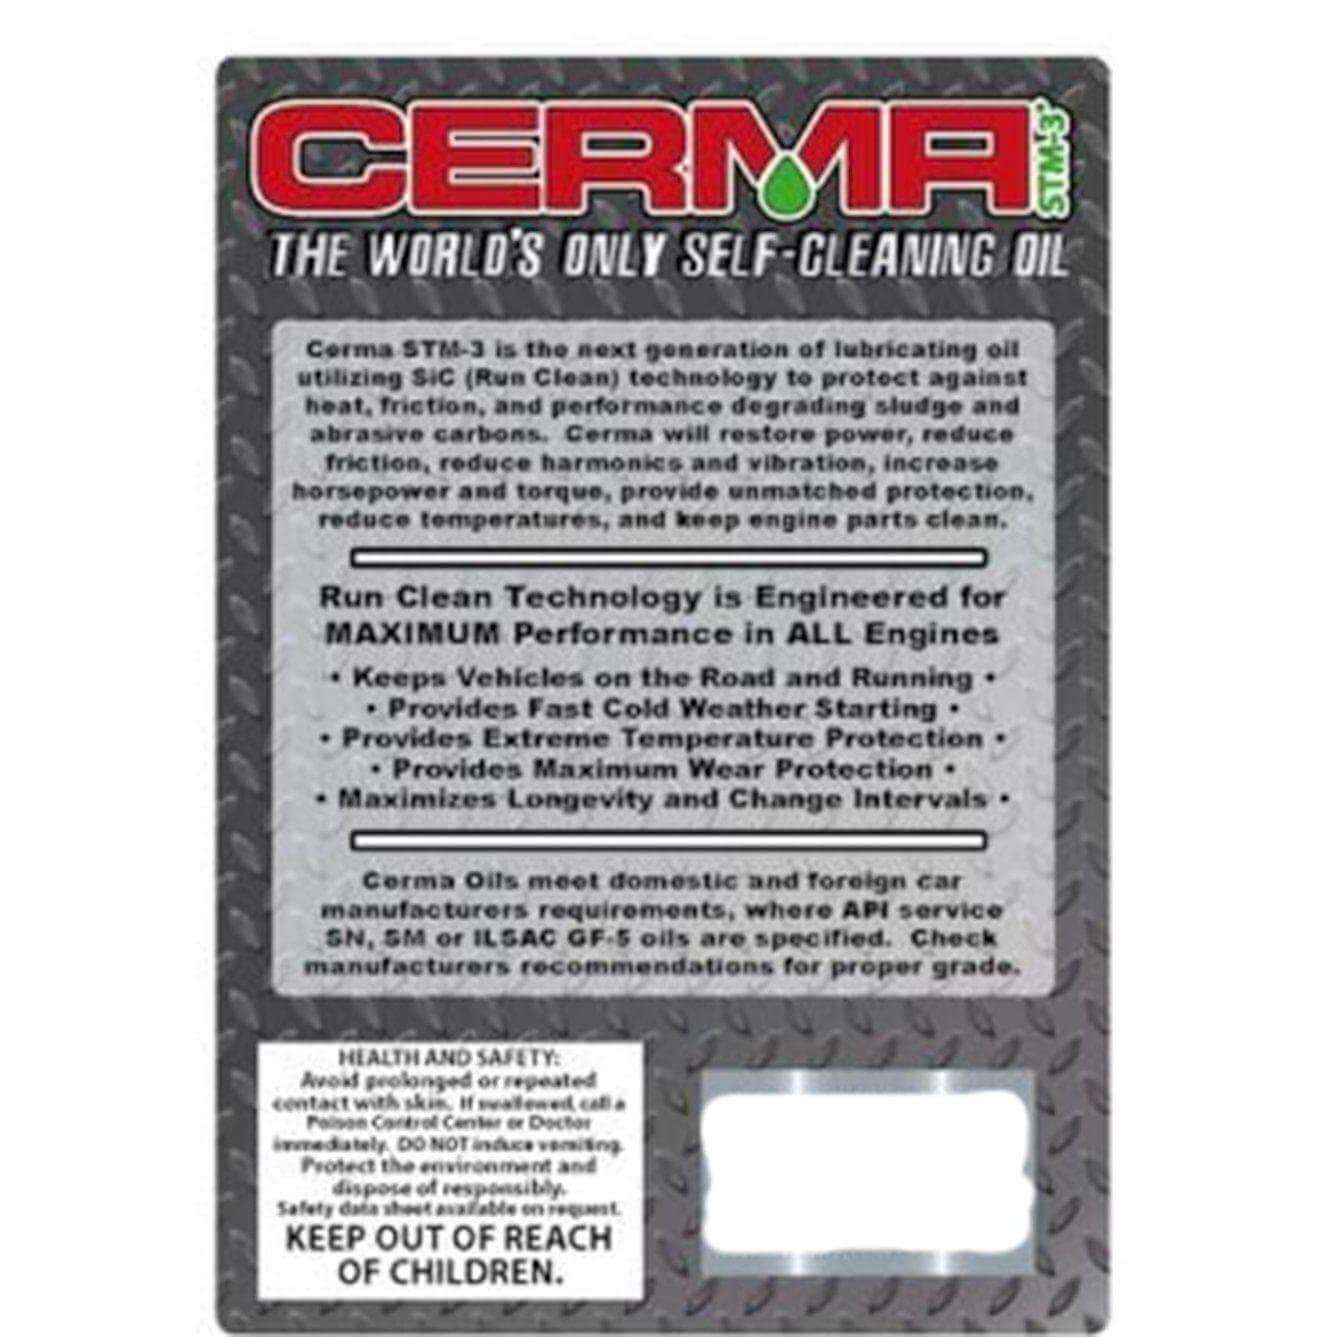 Cermax Ceramic 5w-40W Synthetic Motor Oil at $16.96 only from cermatreatment.com